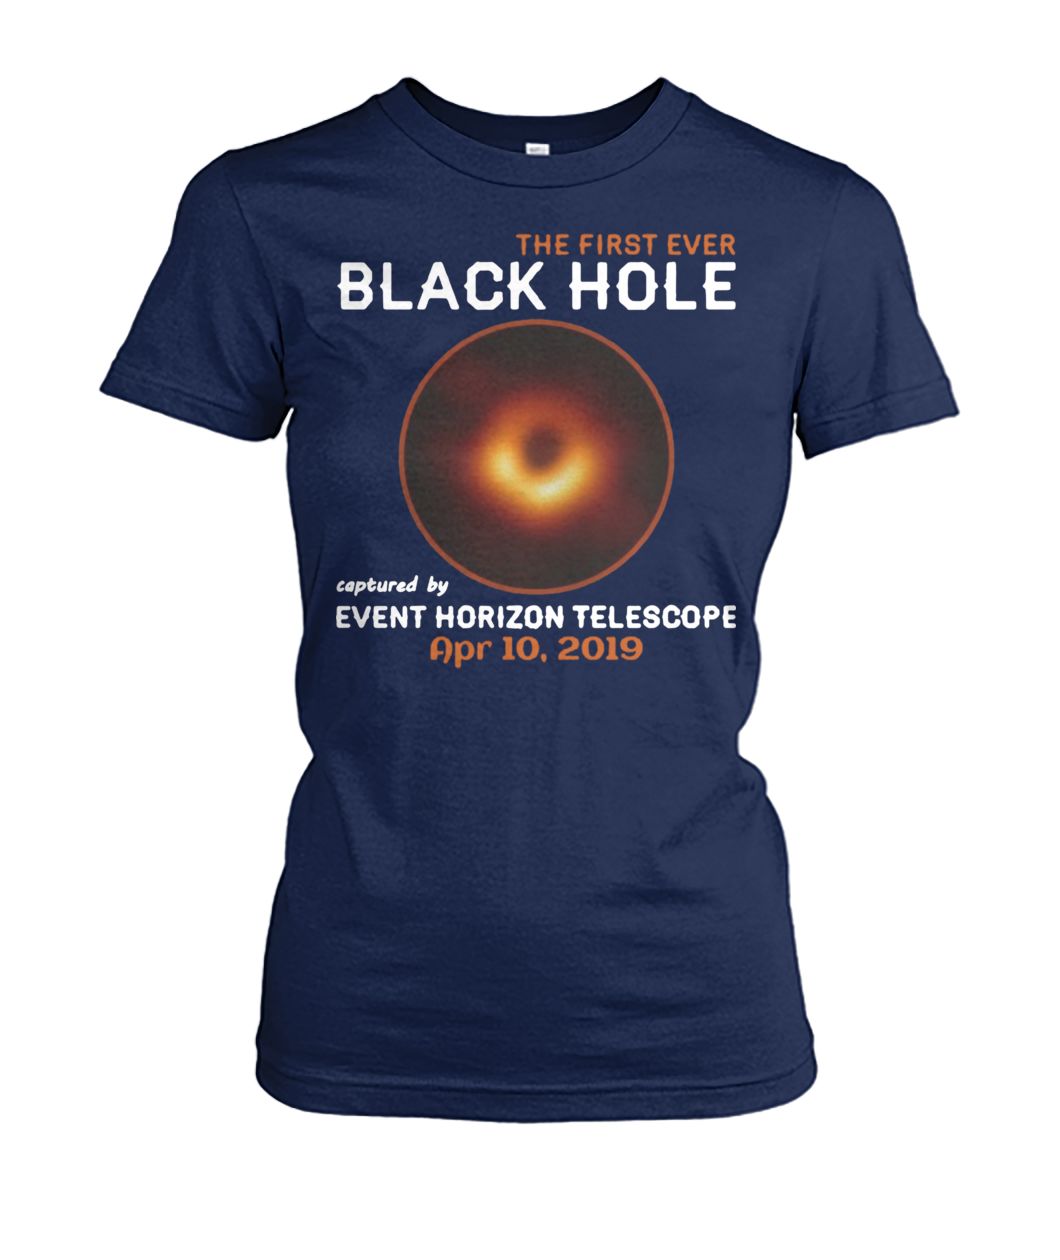 The first ever black hole captured by event horizon telescope april 10th 2019 women's crew tee